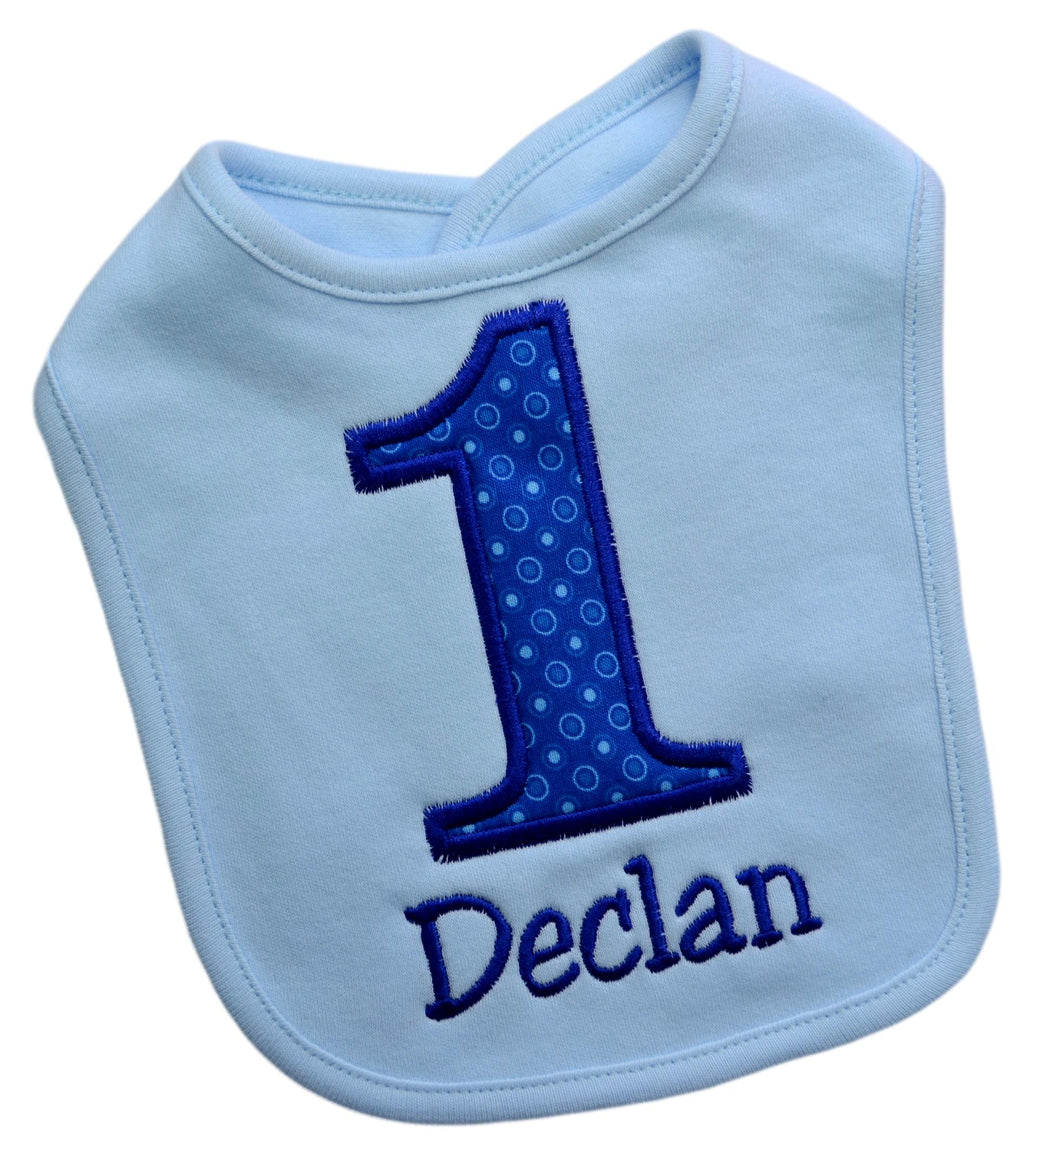 First Birthday Smash Bib for Baby Boy Turning 1 with Custom Embroidered Name